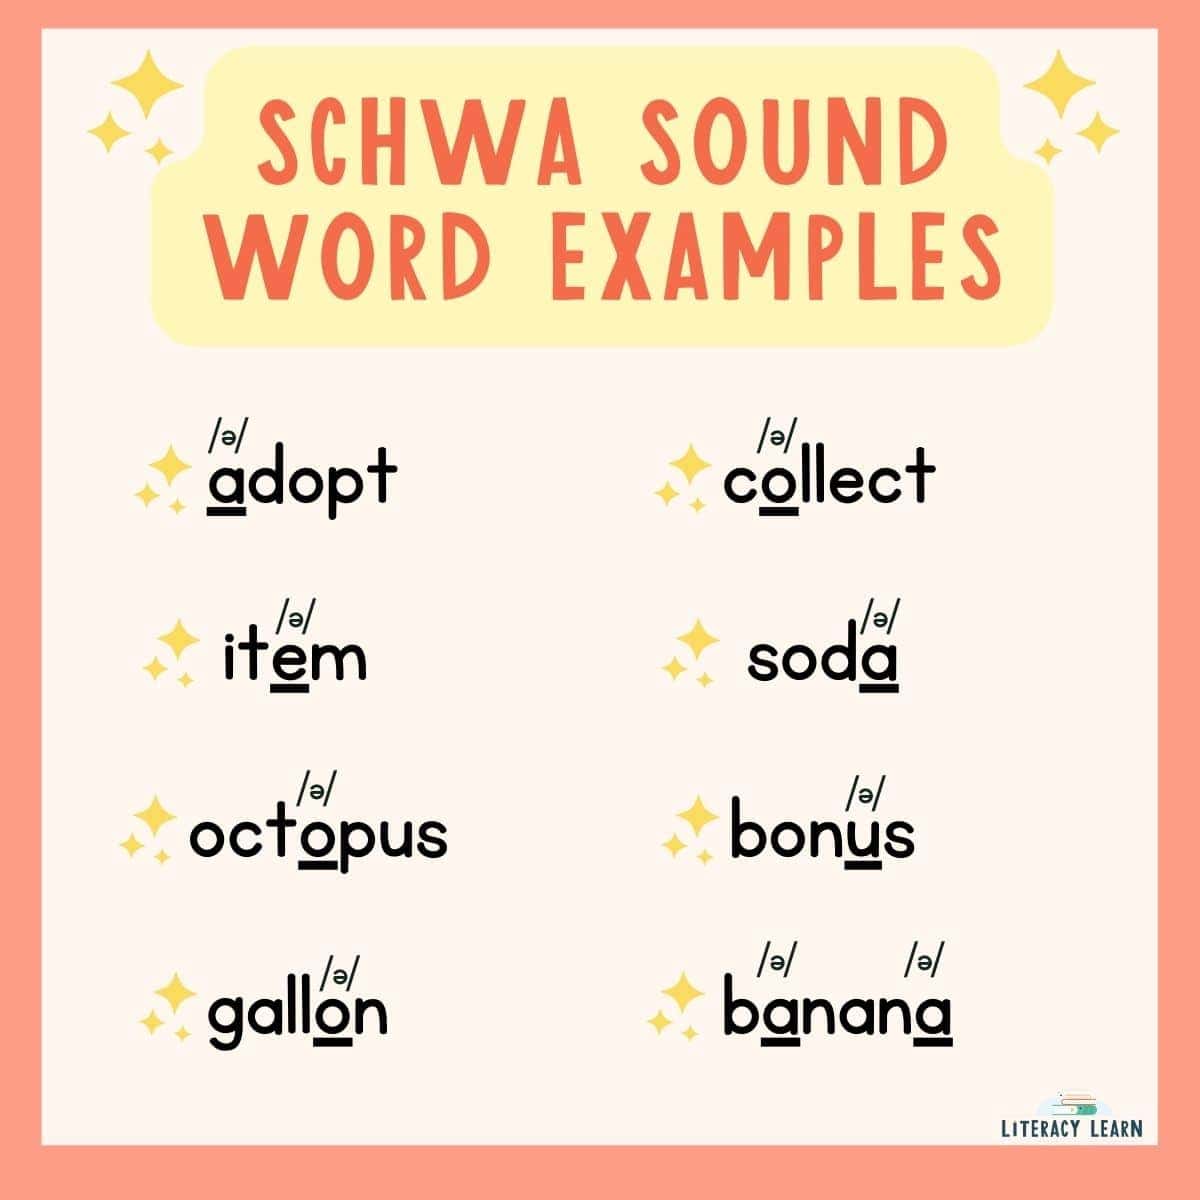 Graphic titled "Schwa Sound Word Examples" with word lists.